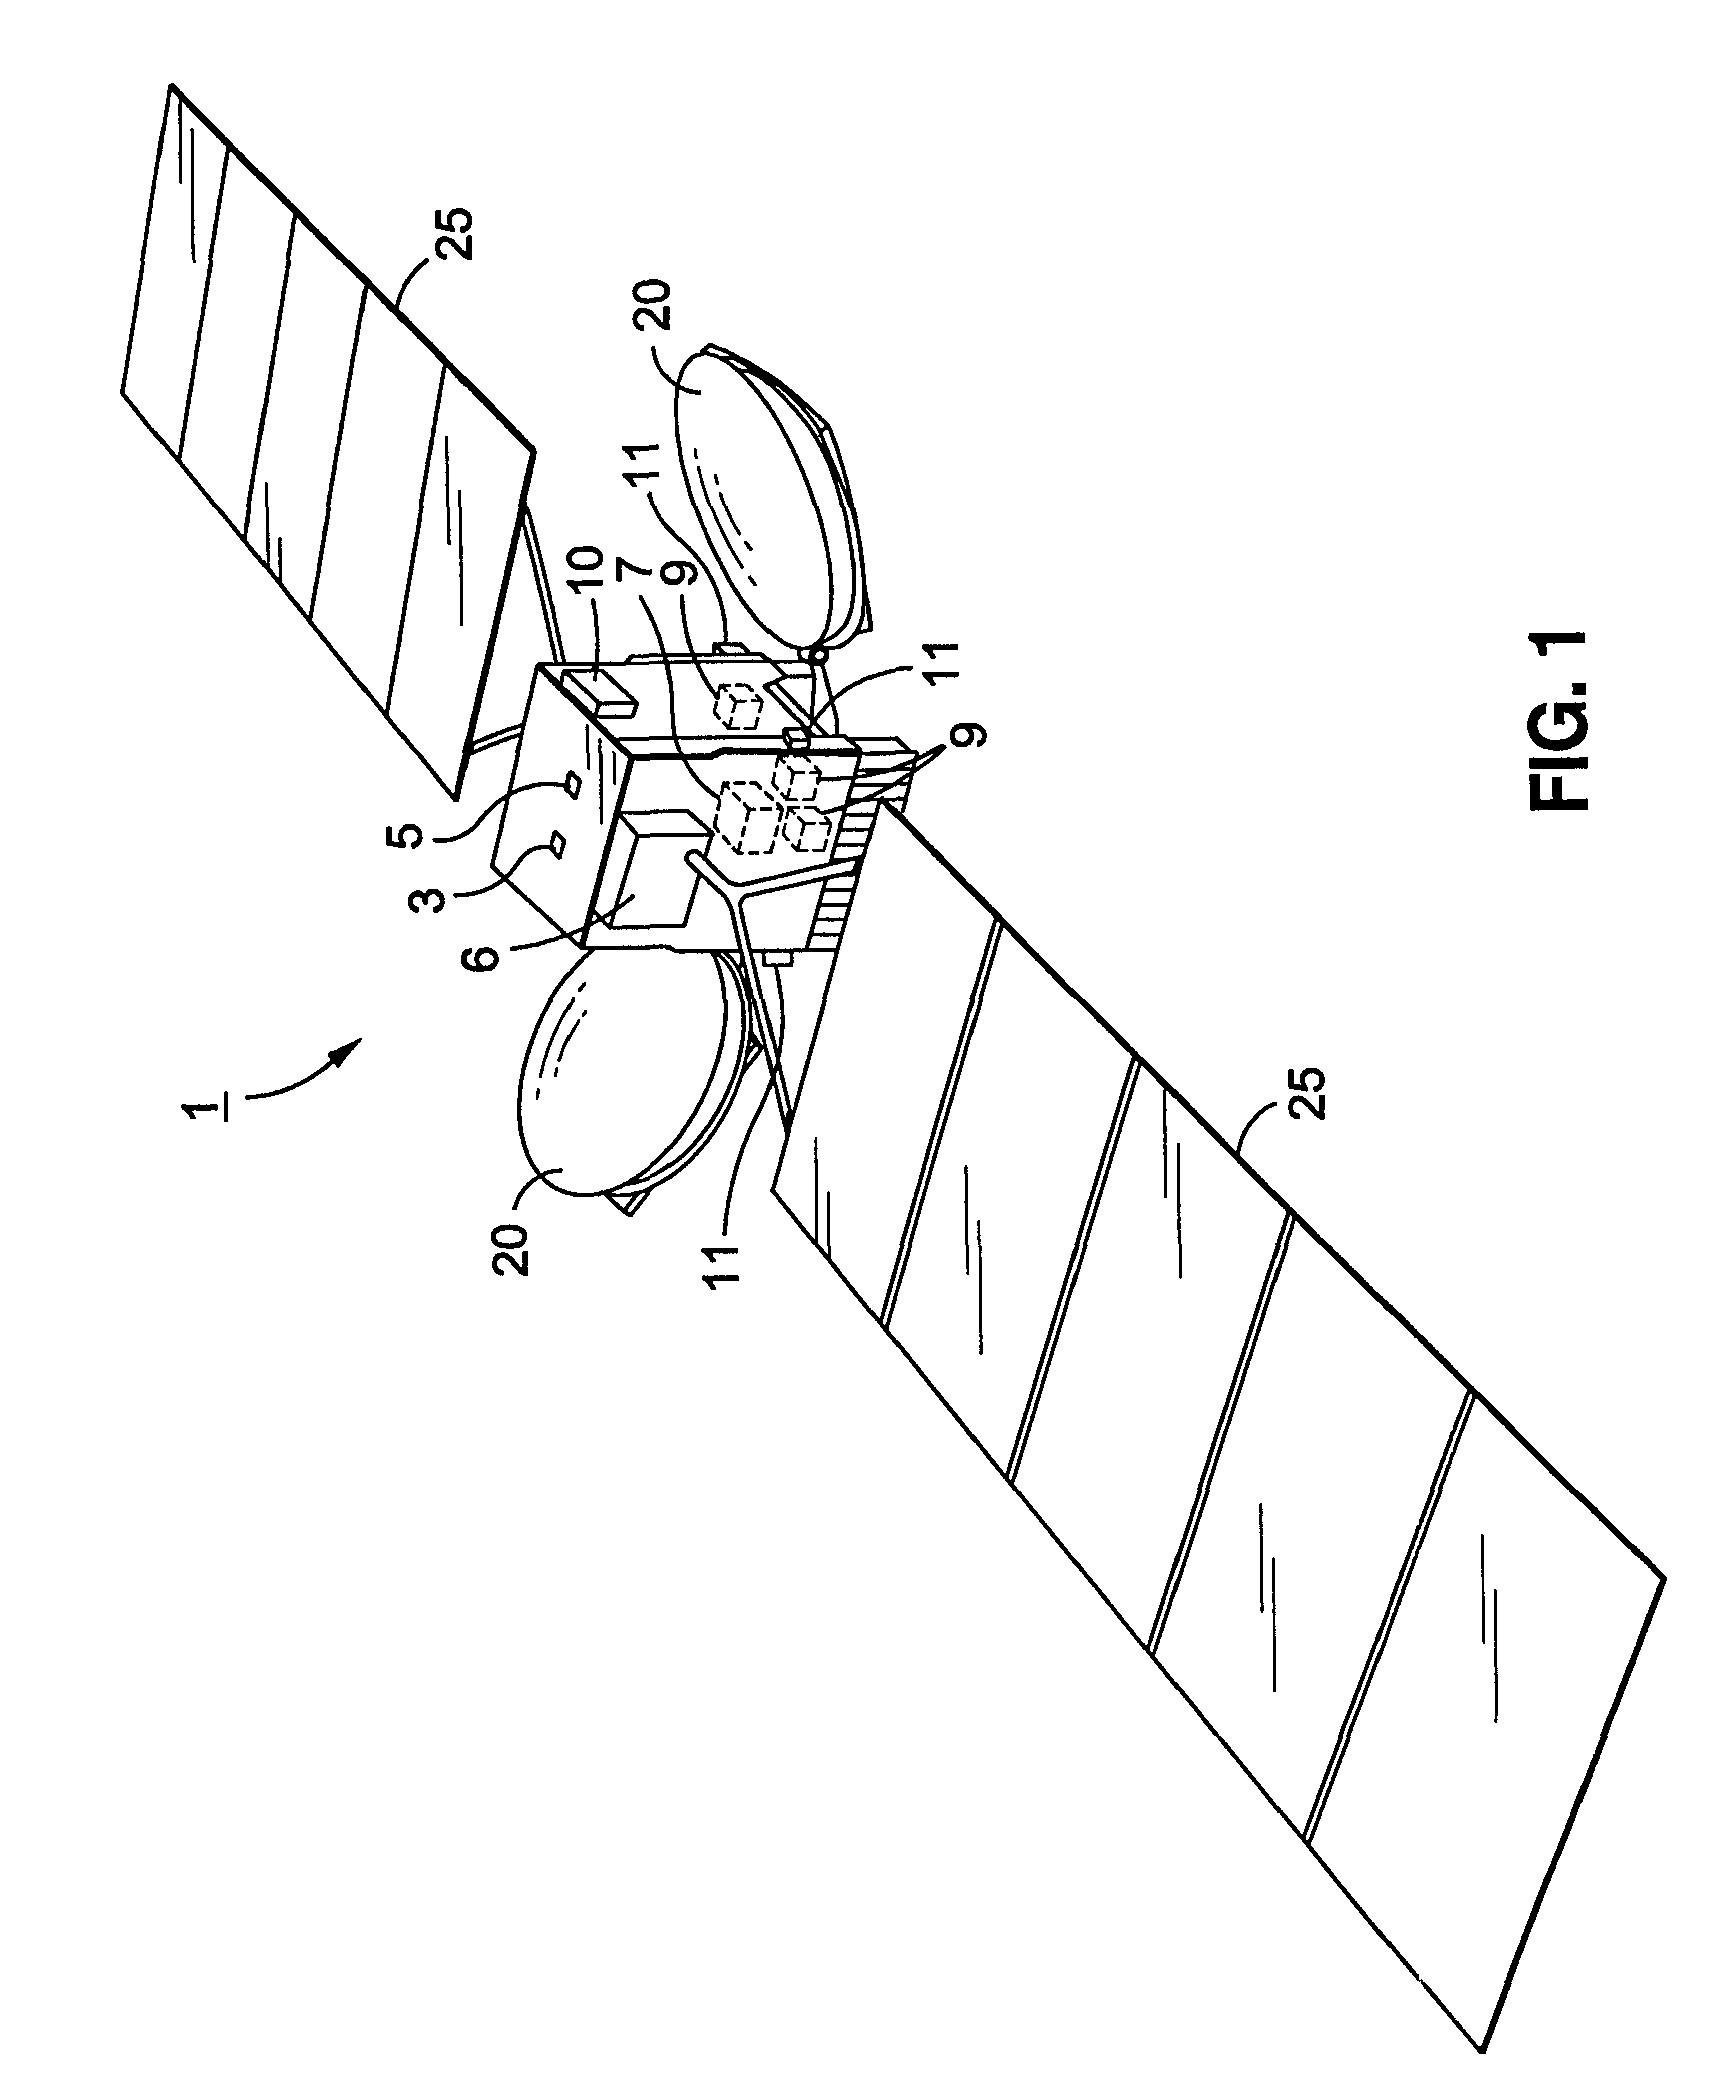 Spacecraft magnetic momentum control system